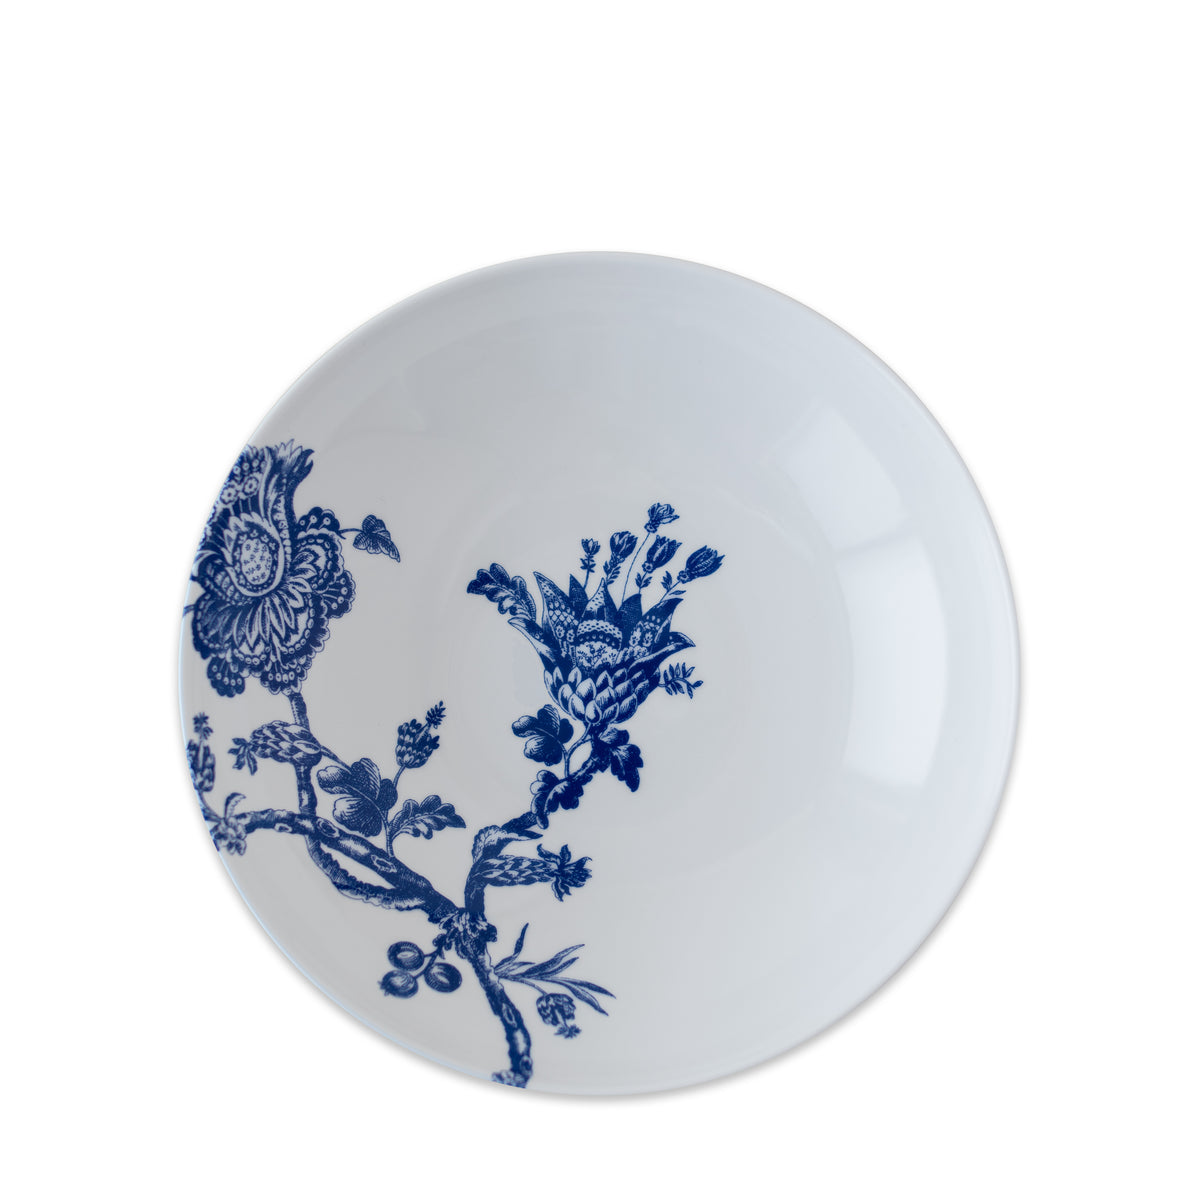 A round white ceramic plate with intricate blue floral designs on one side, reminiscent of the Arcadia Entrée Bowl from Caskata Artisanal Home collection.